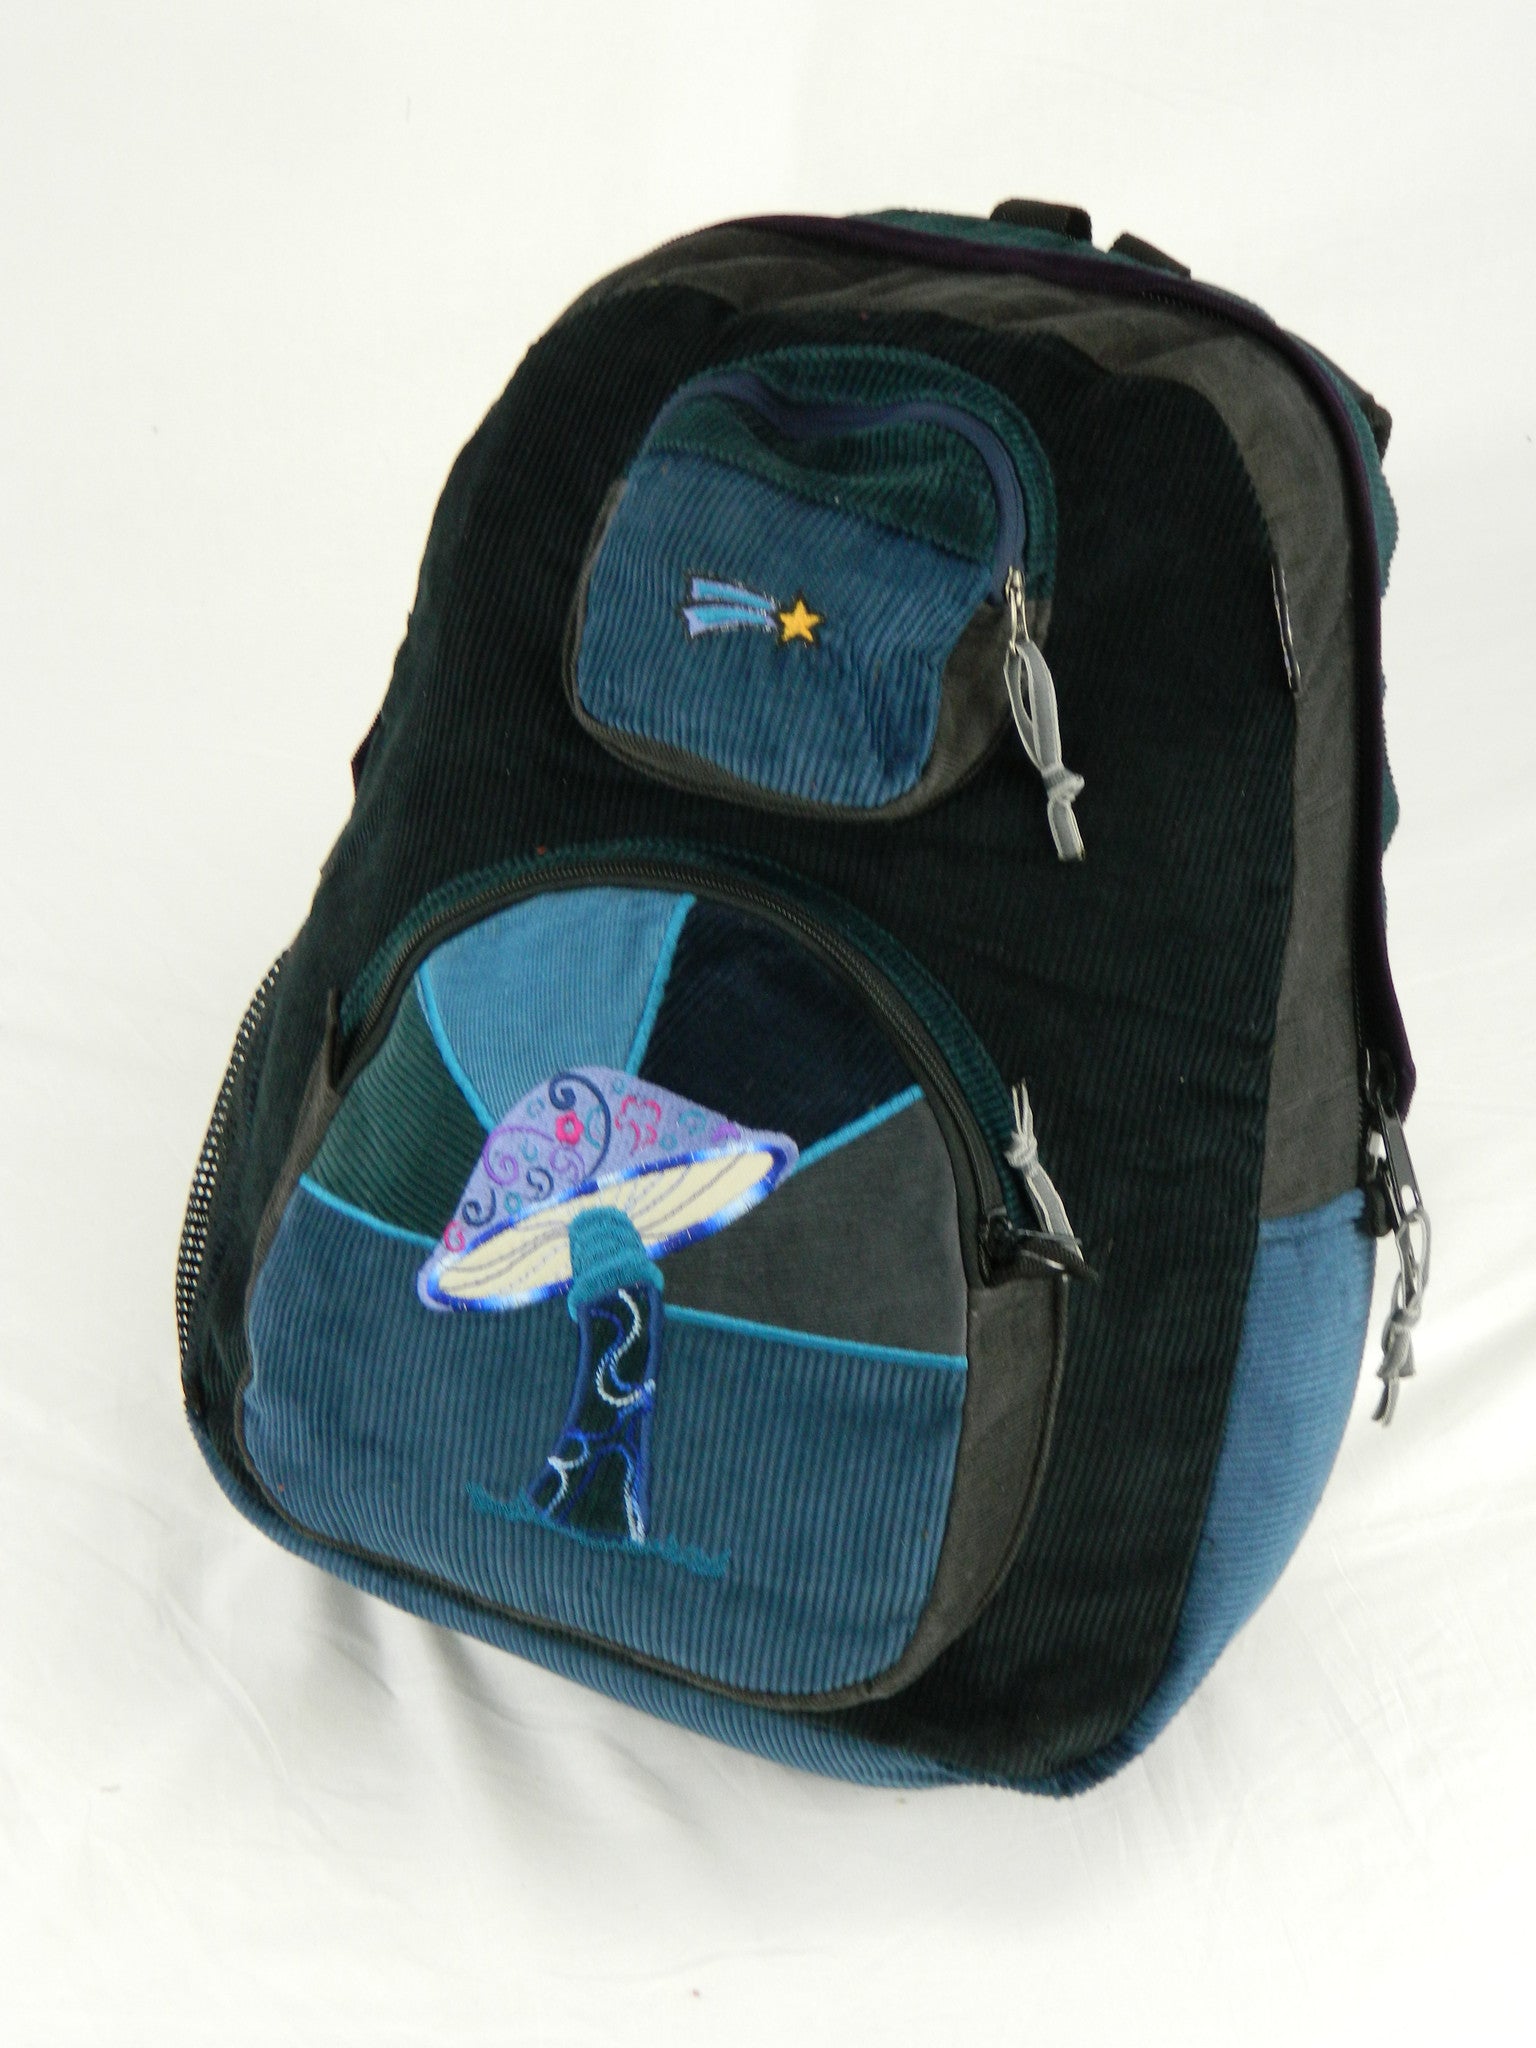 Patchwork Corduroy Backpack with Mushroom Applique (Large)